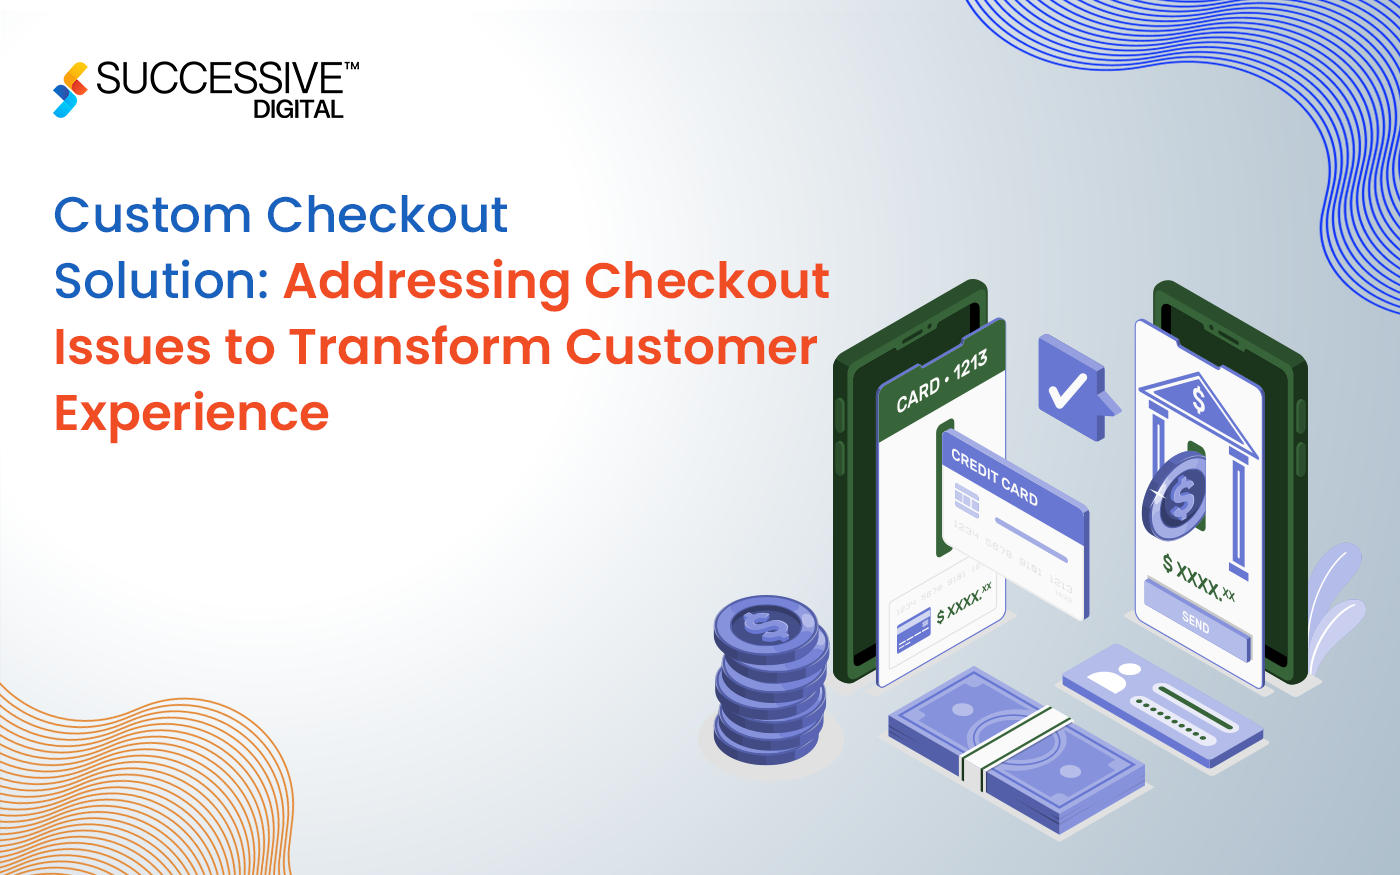 Custom Checkout Solution: Addressing Checkout Issues to Transform Customer Experience